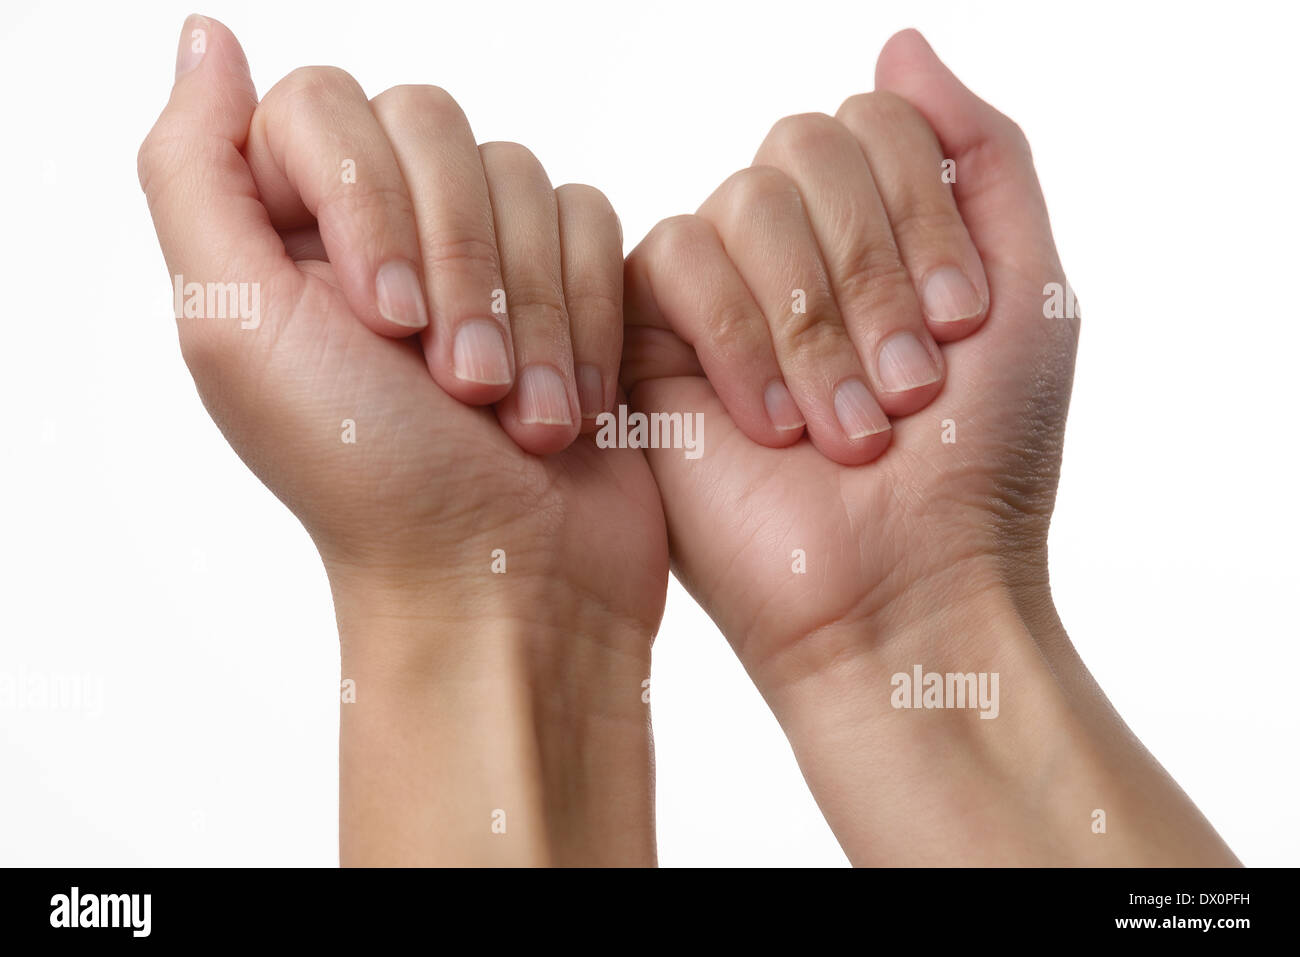 Woman with natural manicured nails displaying her fingers bent onto her palms in a skincare, nail care and beauty concept Stock Photo